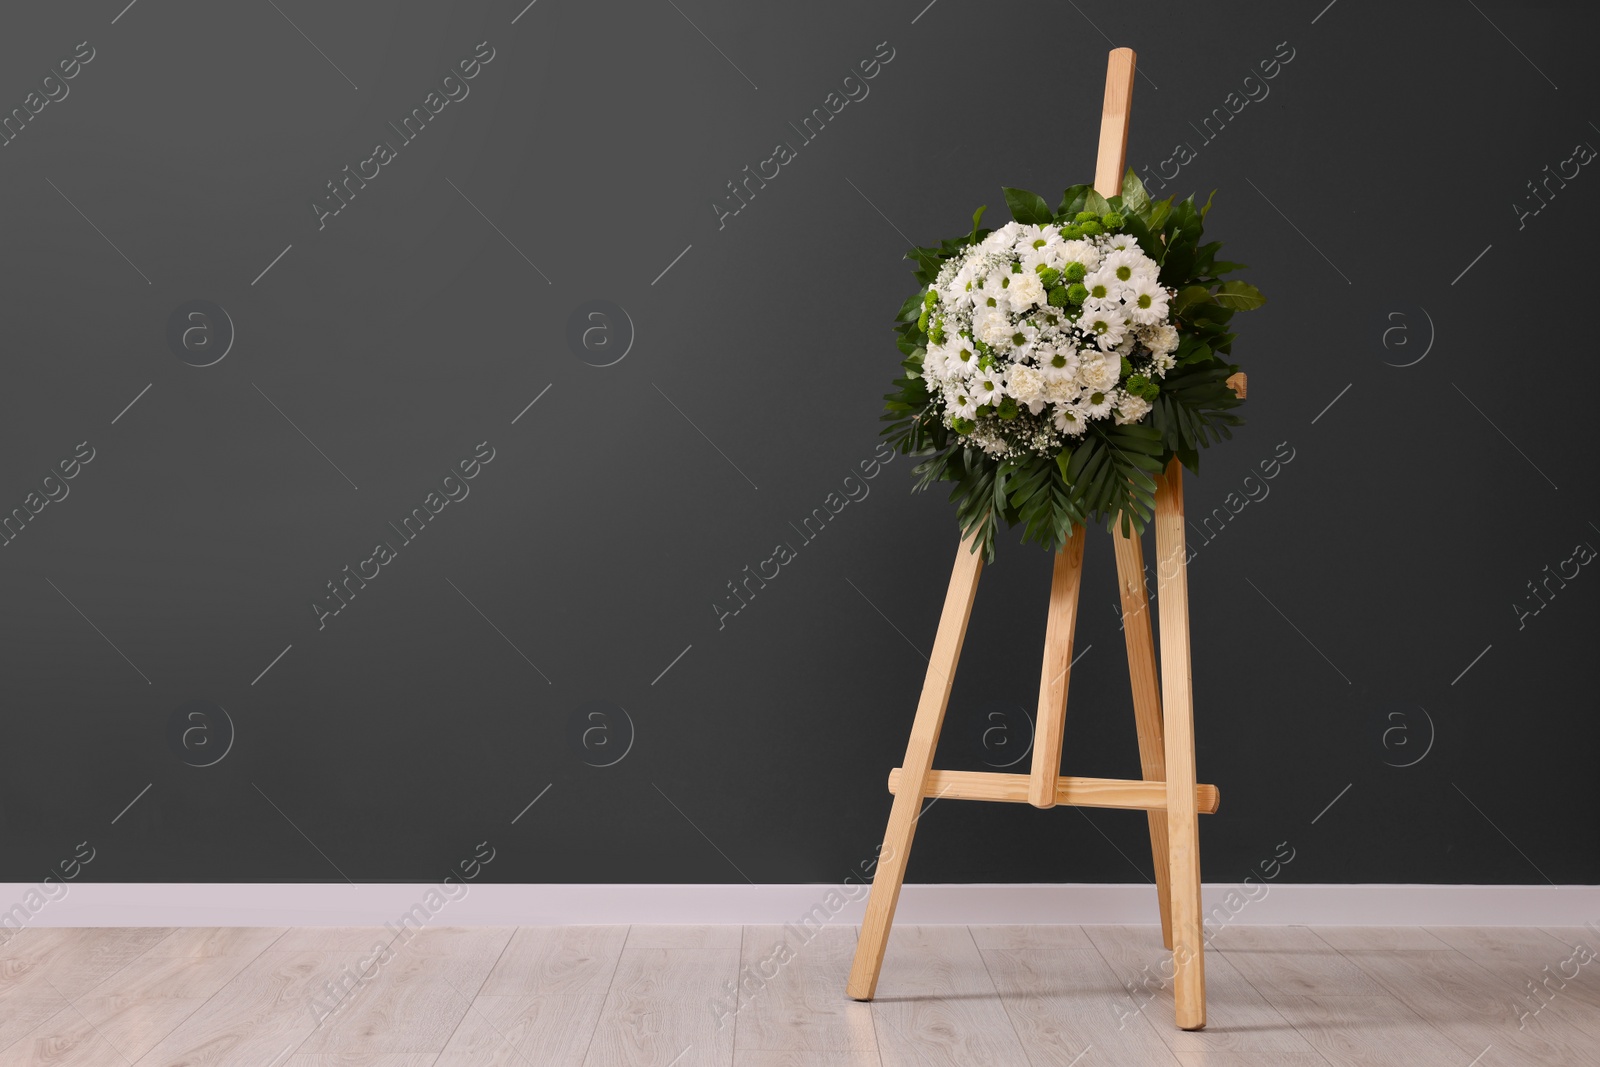 Photo of Funeral wreath of flowers on wooden stand near dark grey wall indoors, space for text